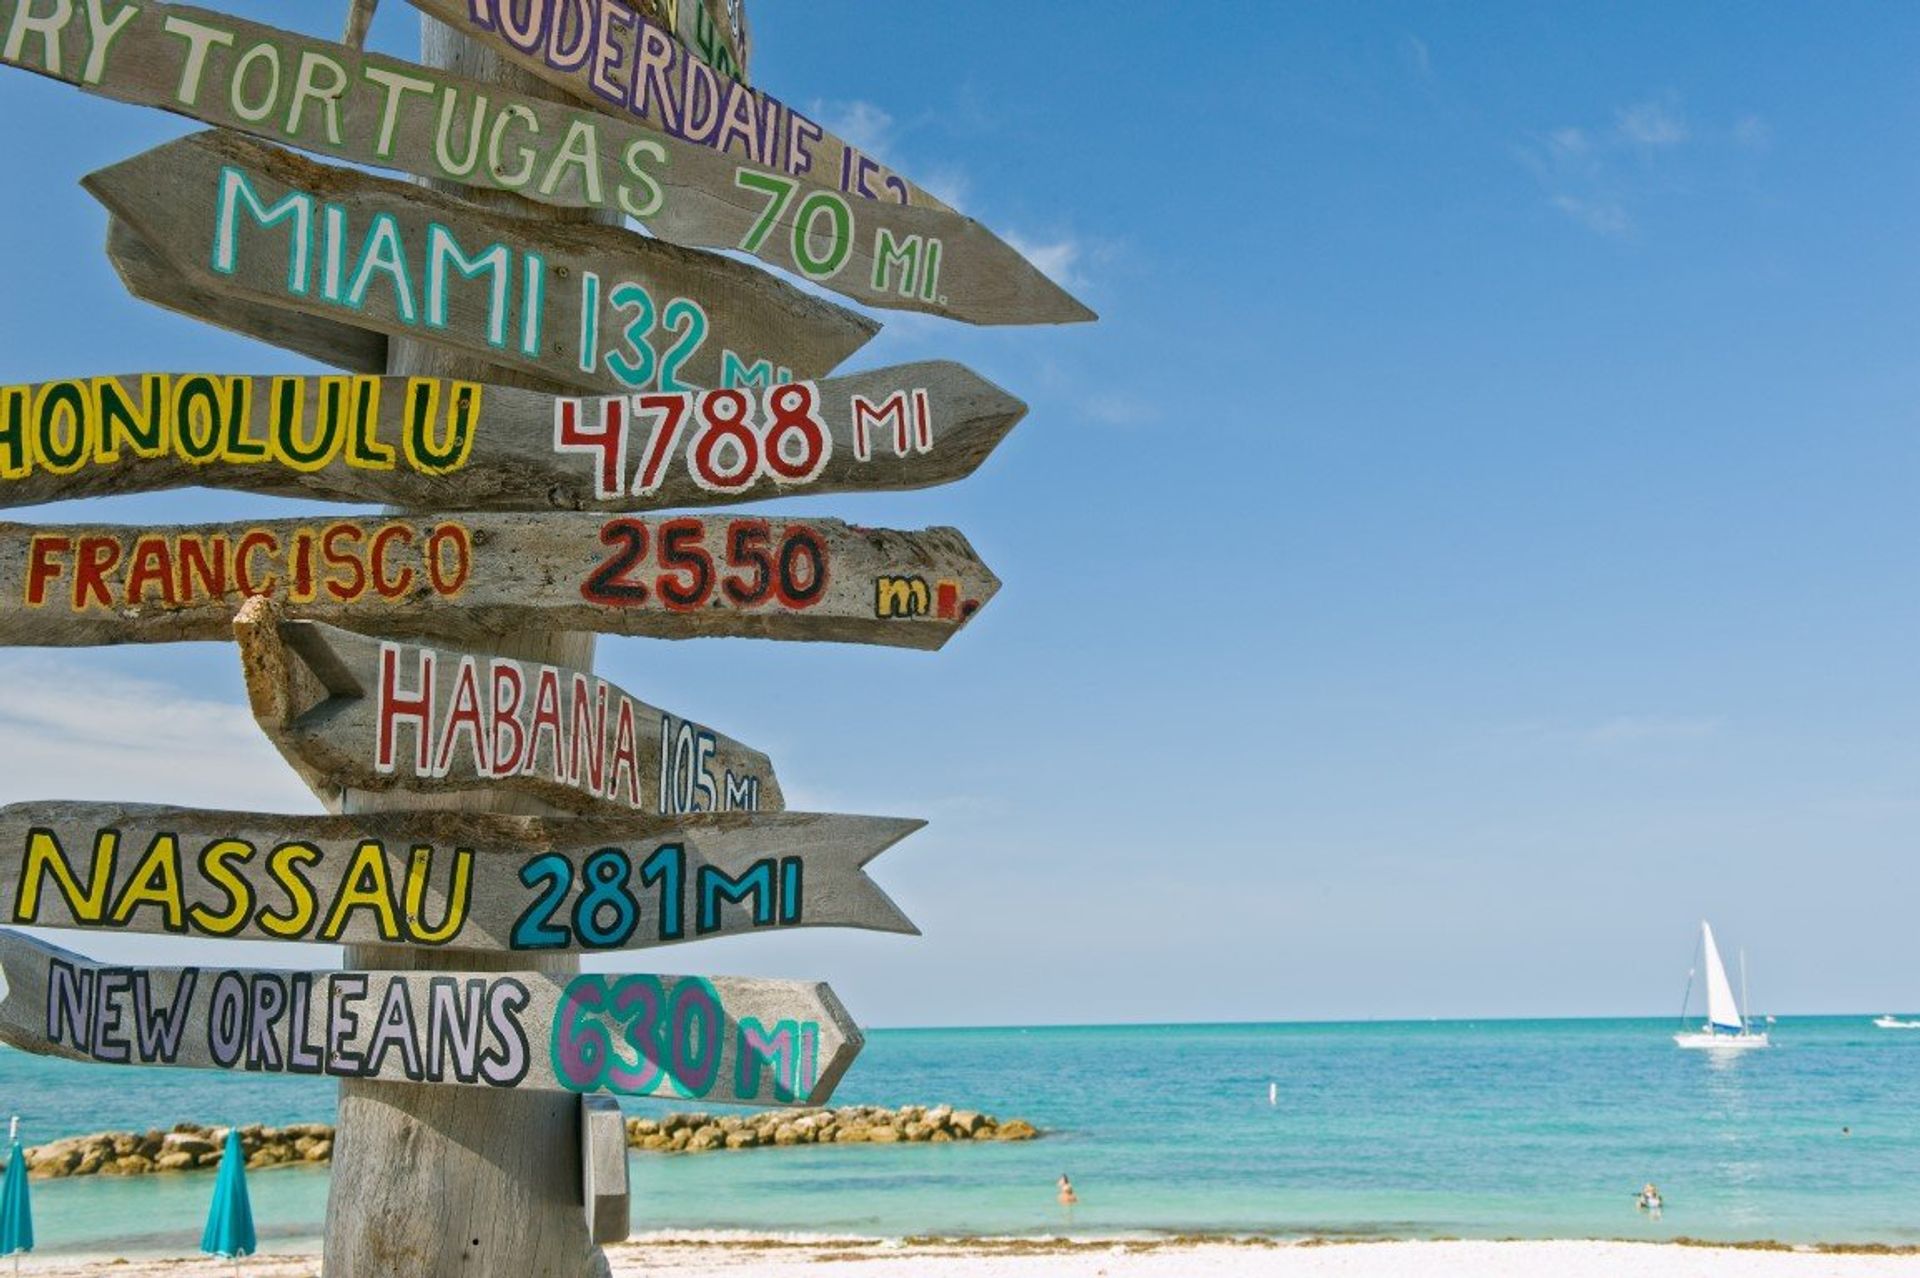 The iconic sign post at Fort Zachary beach, Key West